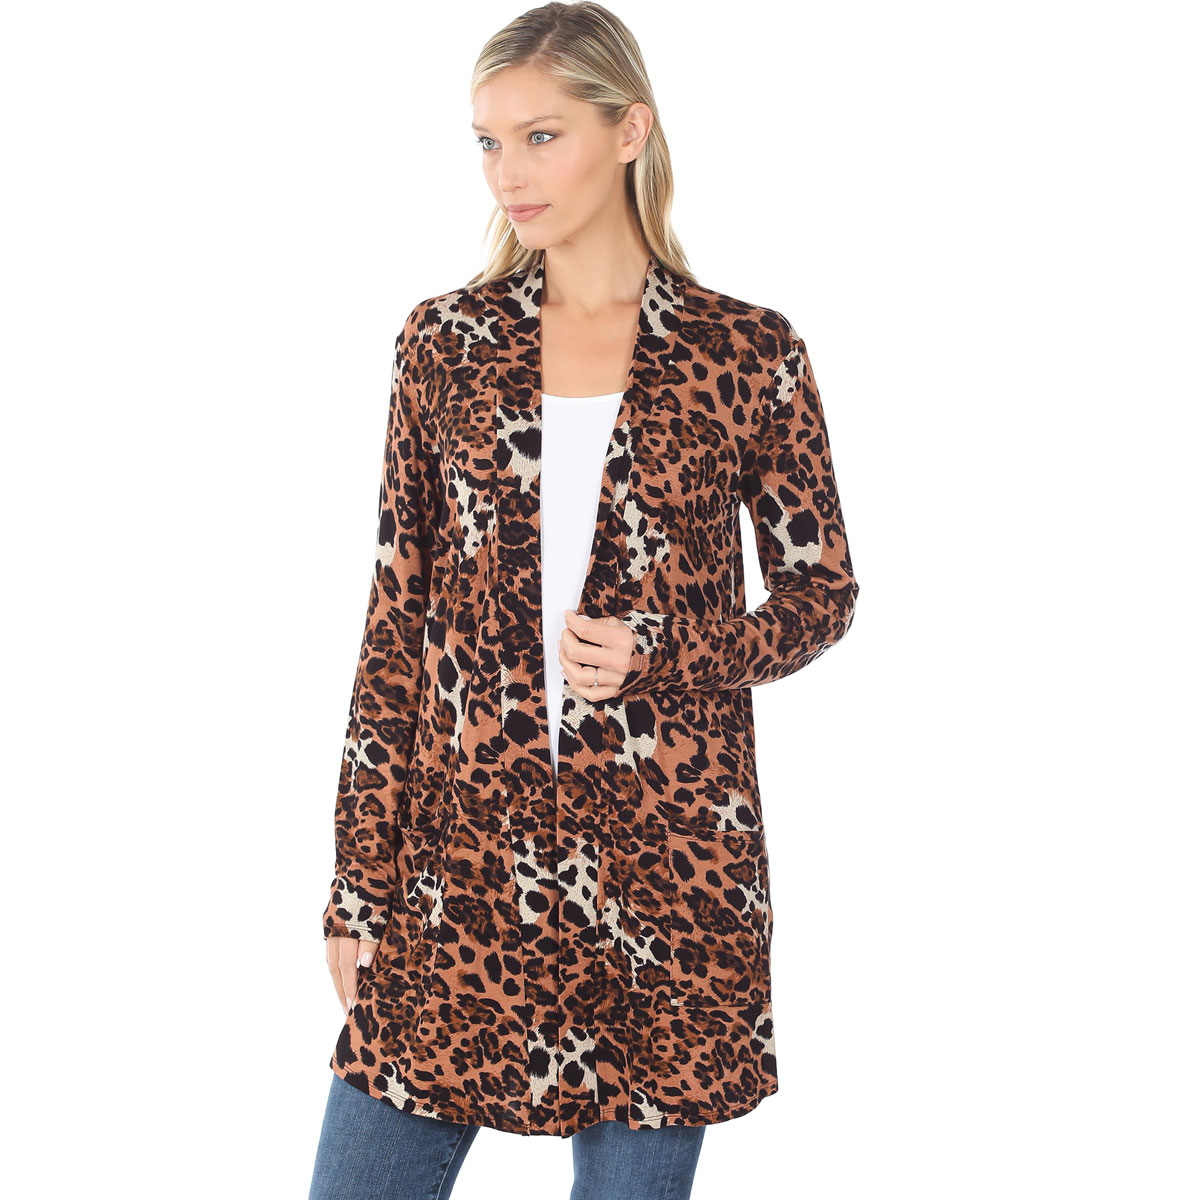 Slouchy Pocket Open Cardigan Prints 320 and 900